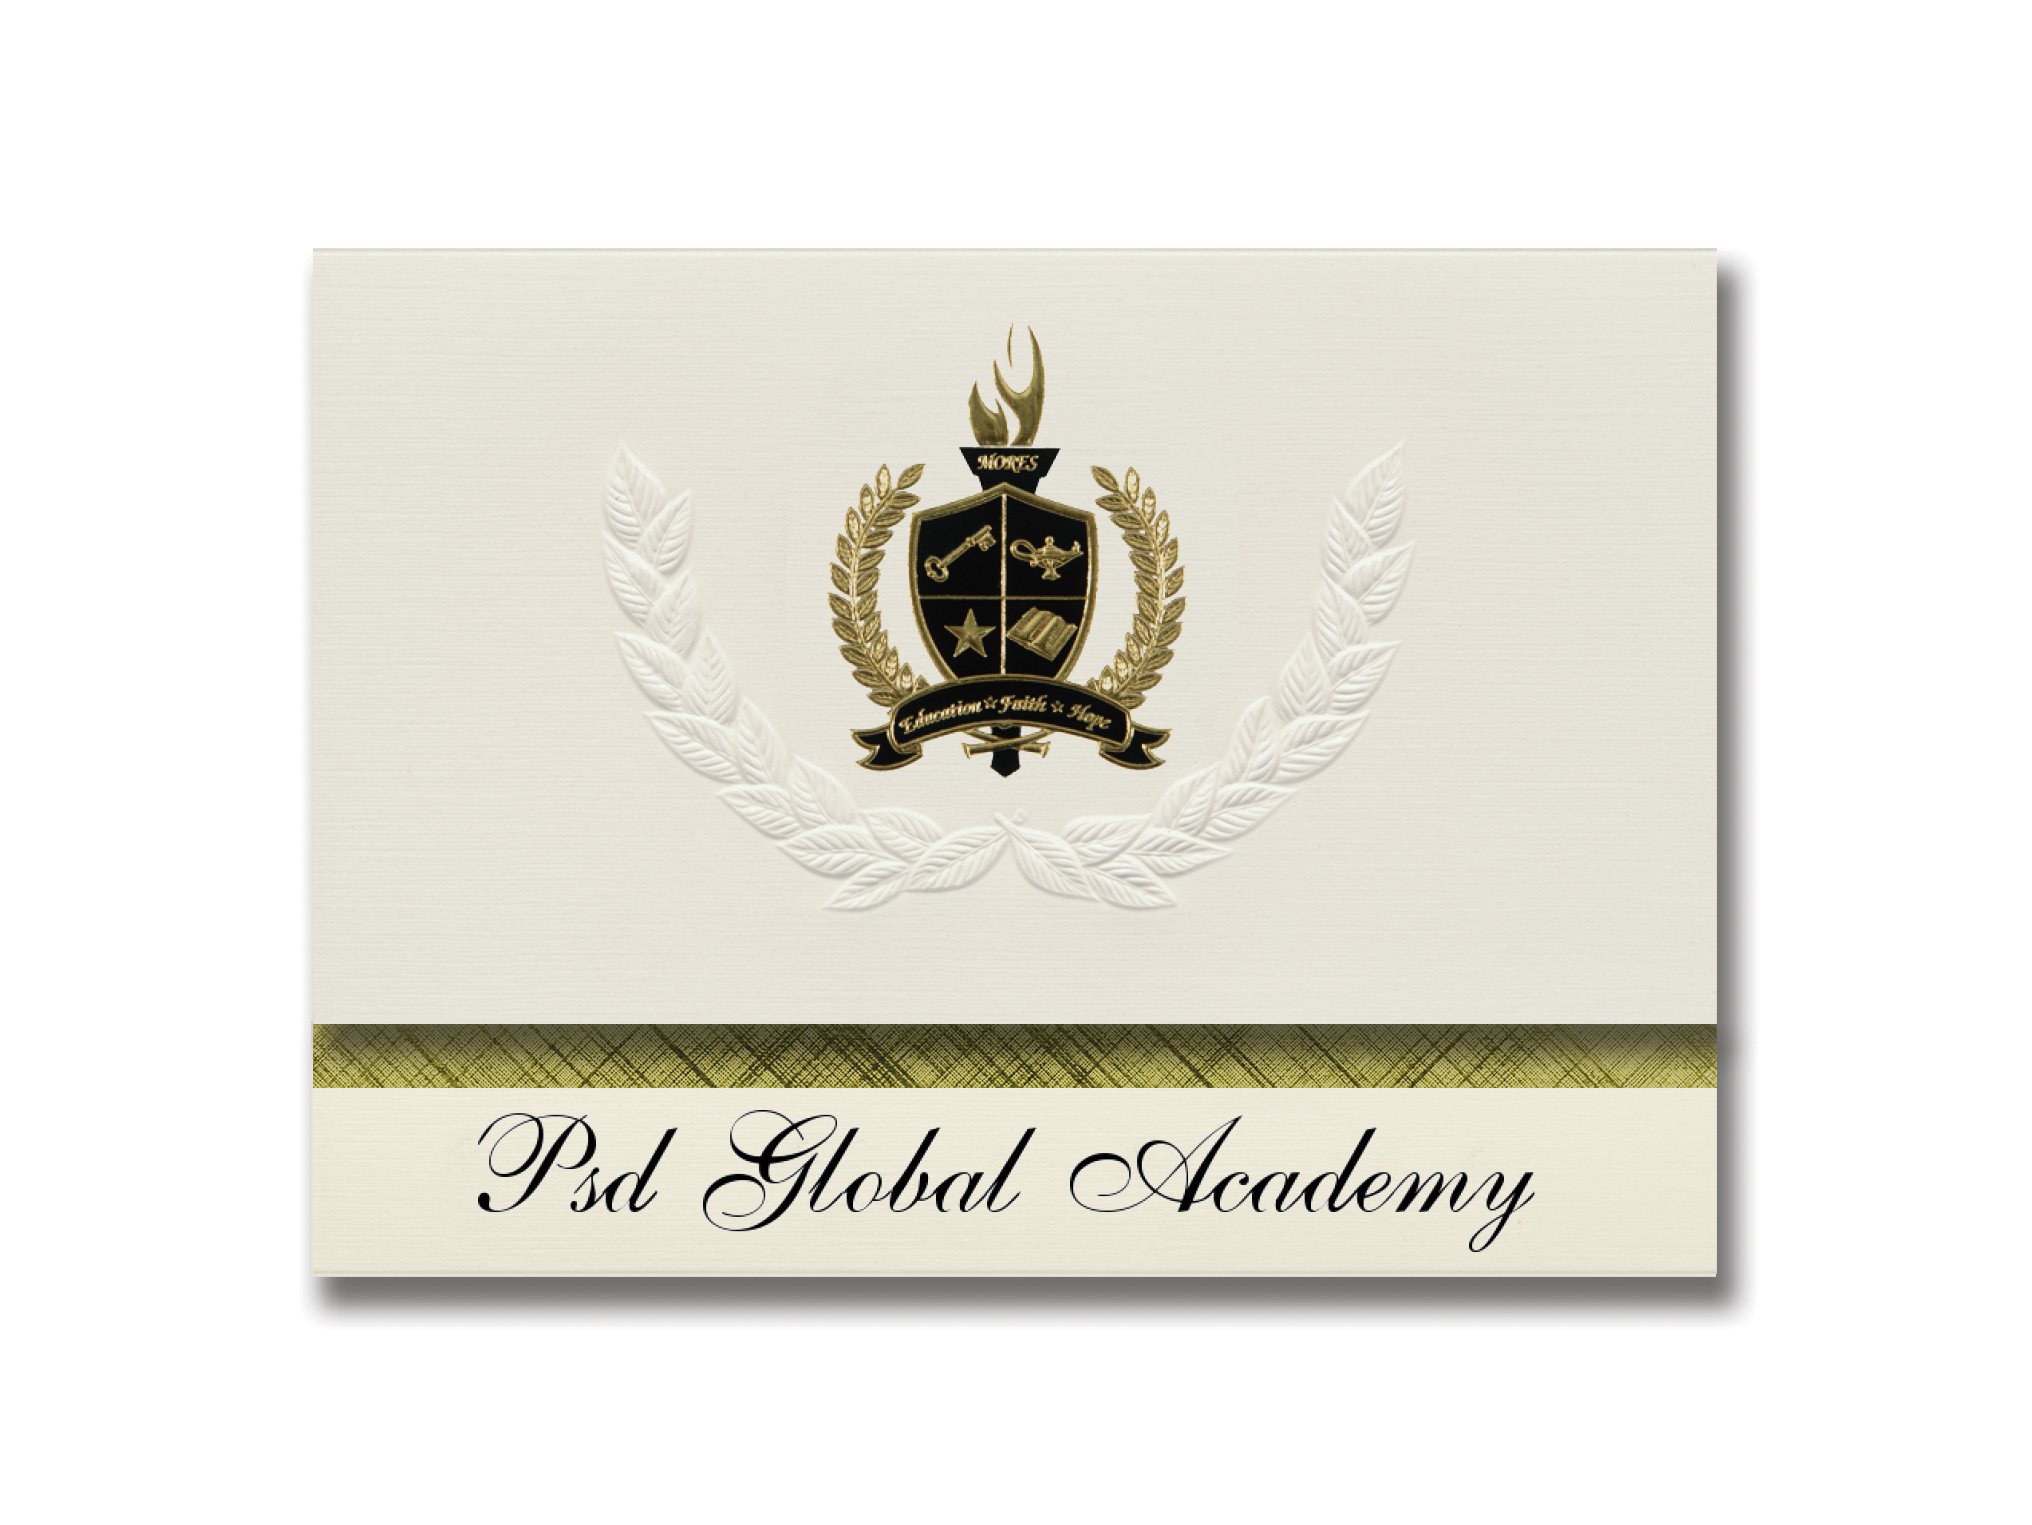 Signature Announcements Psd Global Academy (Fort Collins, CO) Graduation Announcements, Presidential style, Basic package of 25 with Gold & Black M...